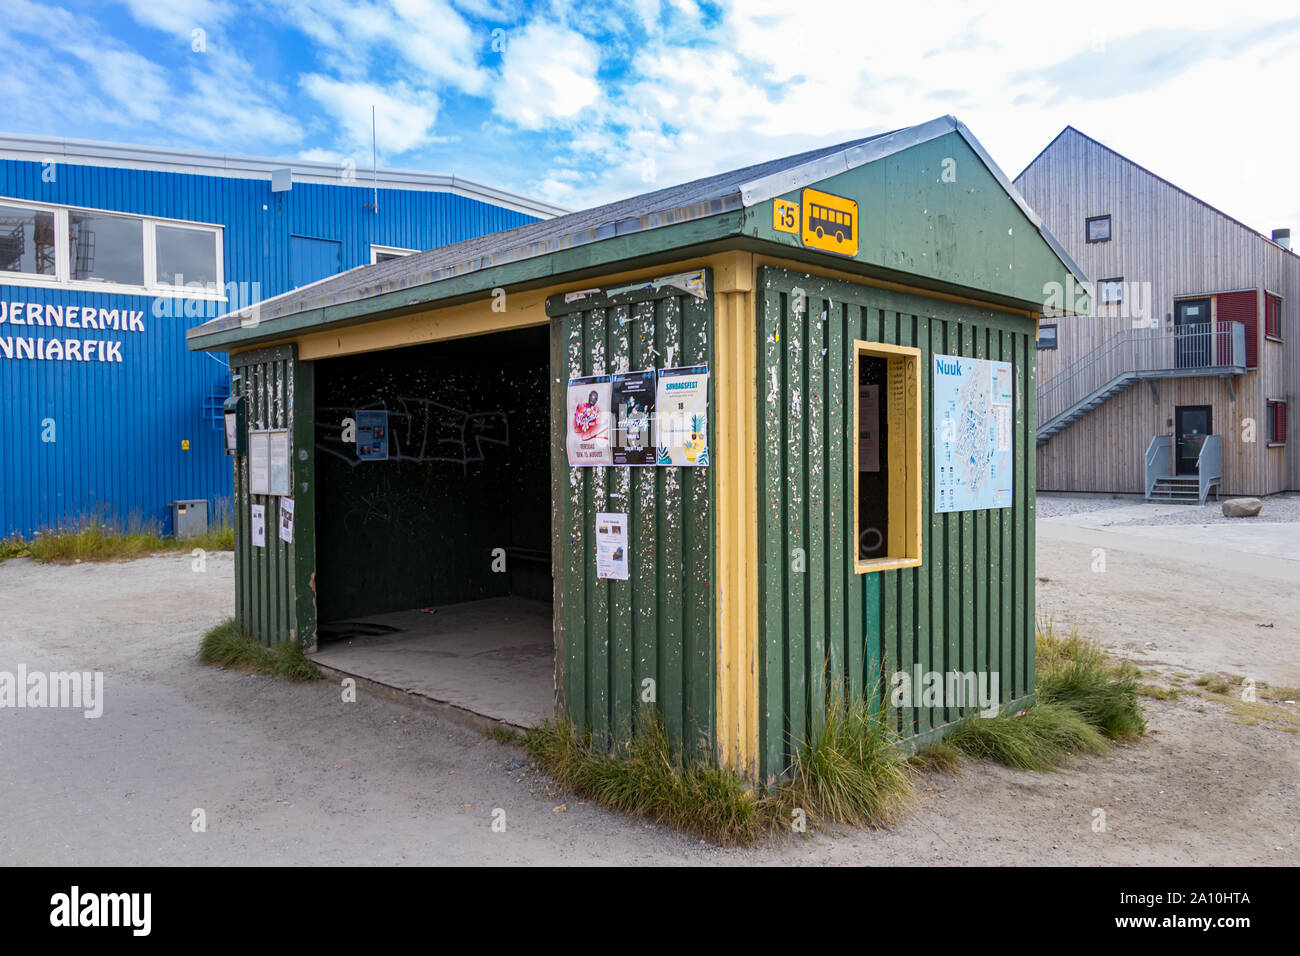 Wooden bus stop in the Nuuk center, Greenland. Stock Photo